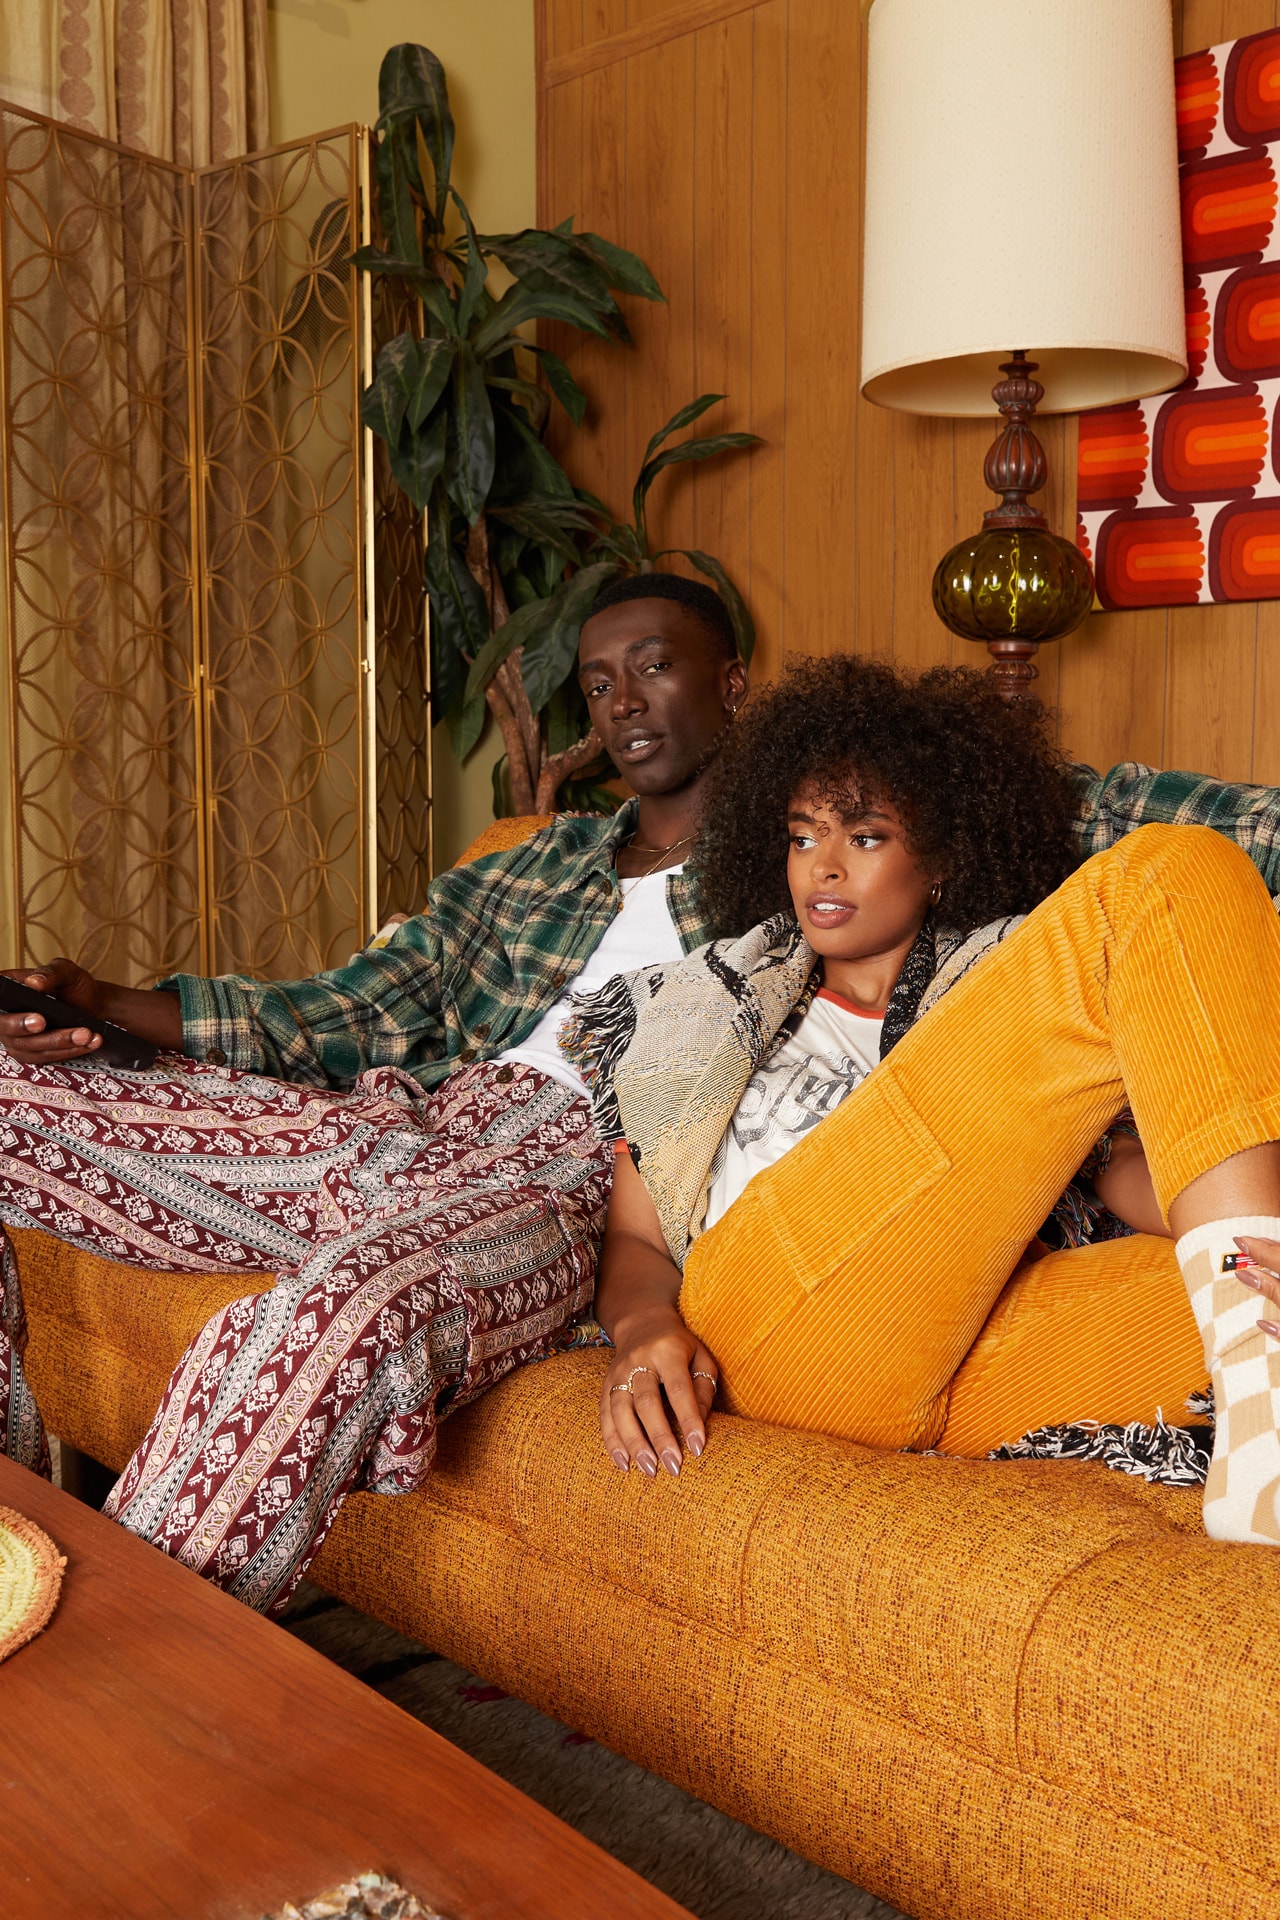 honor the gift russell westbrook los angeles lakers guard menswear womenswear streetwear brand fall 21 collection inner city love commitment hardship sacrifice mens womens kids silhouettes new functional color palette rich textures spiritually-inspired graphics novelty knit fabrics